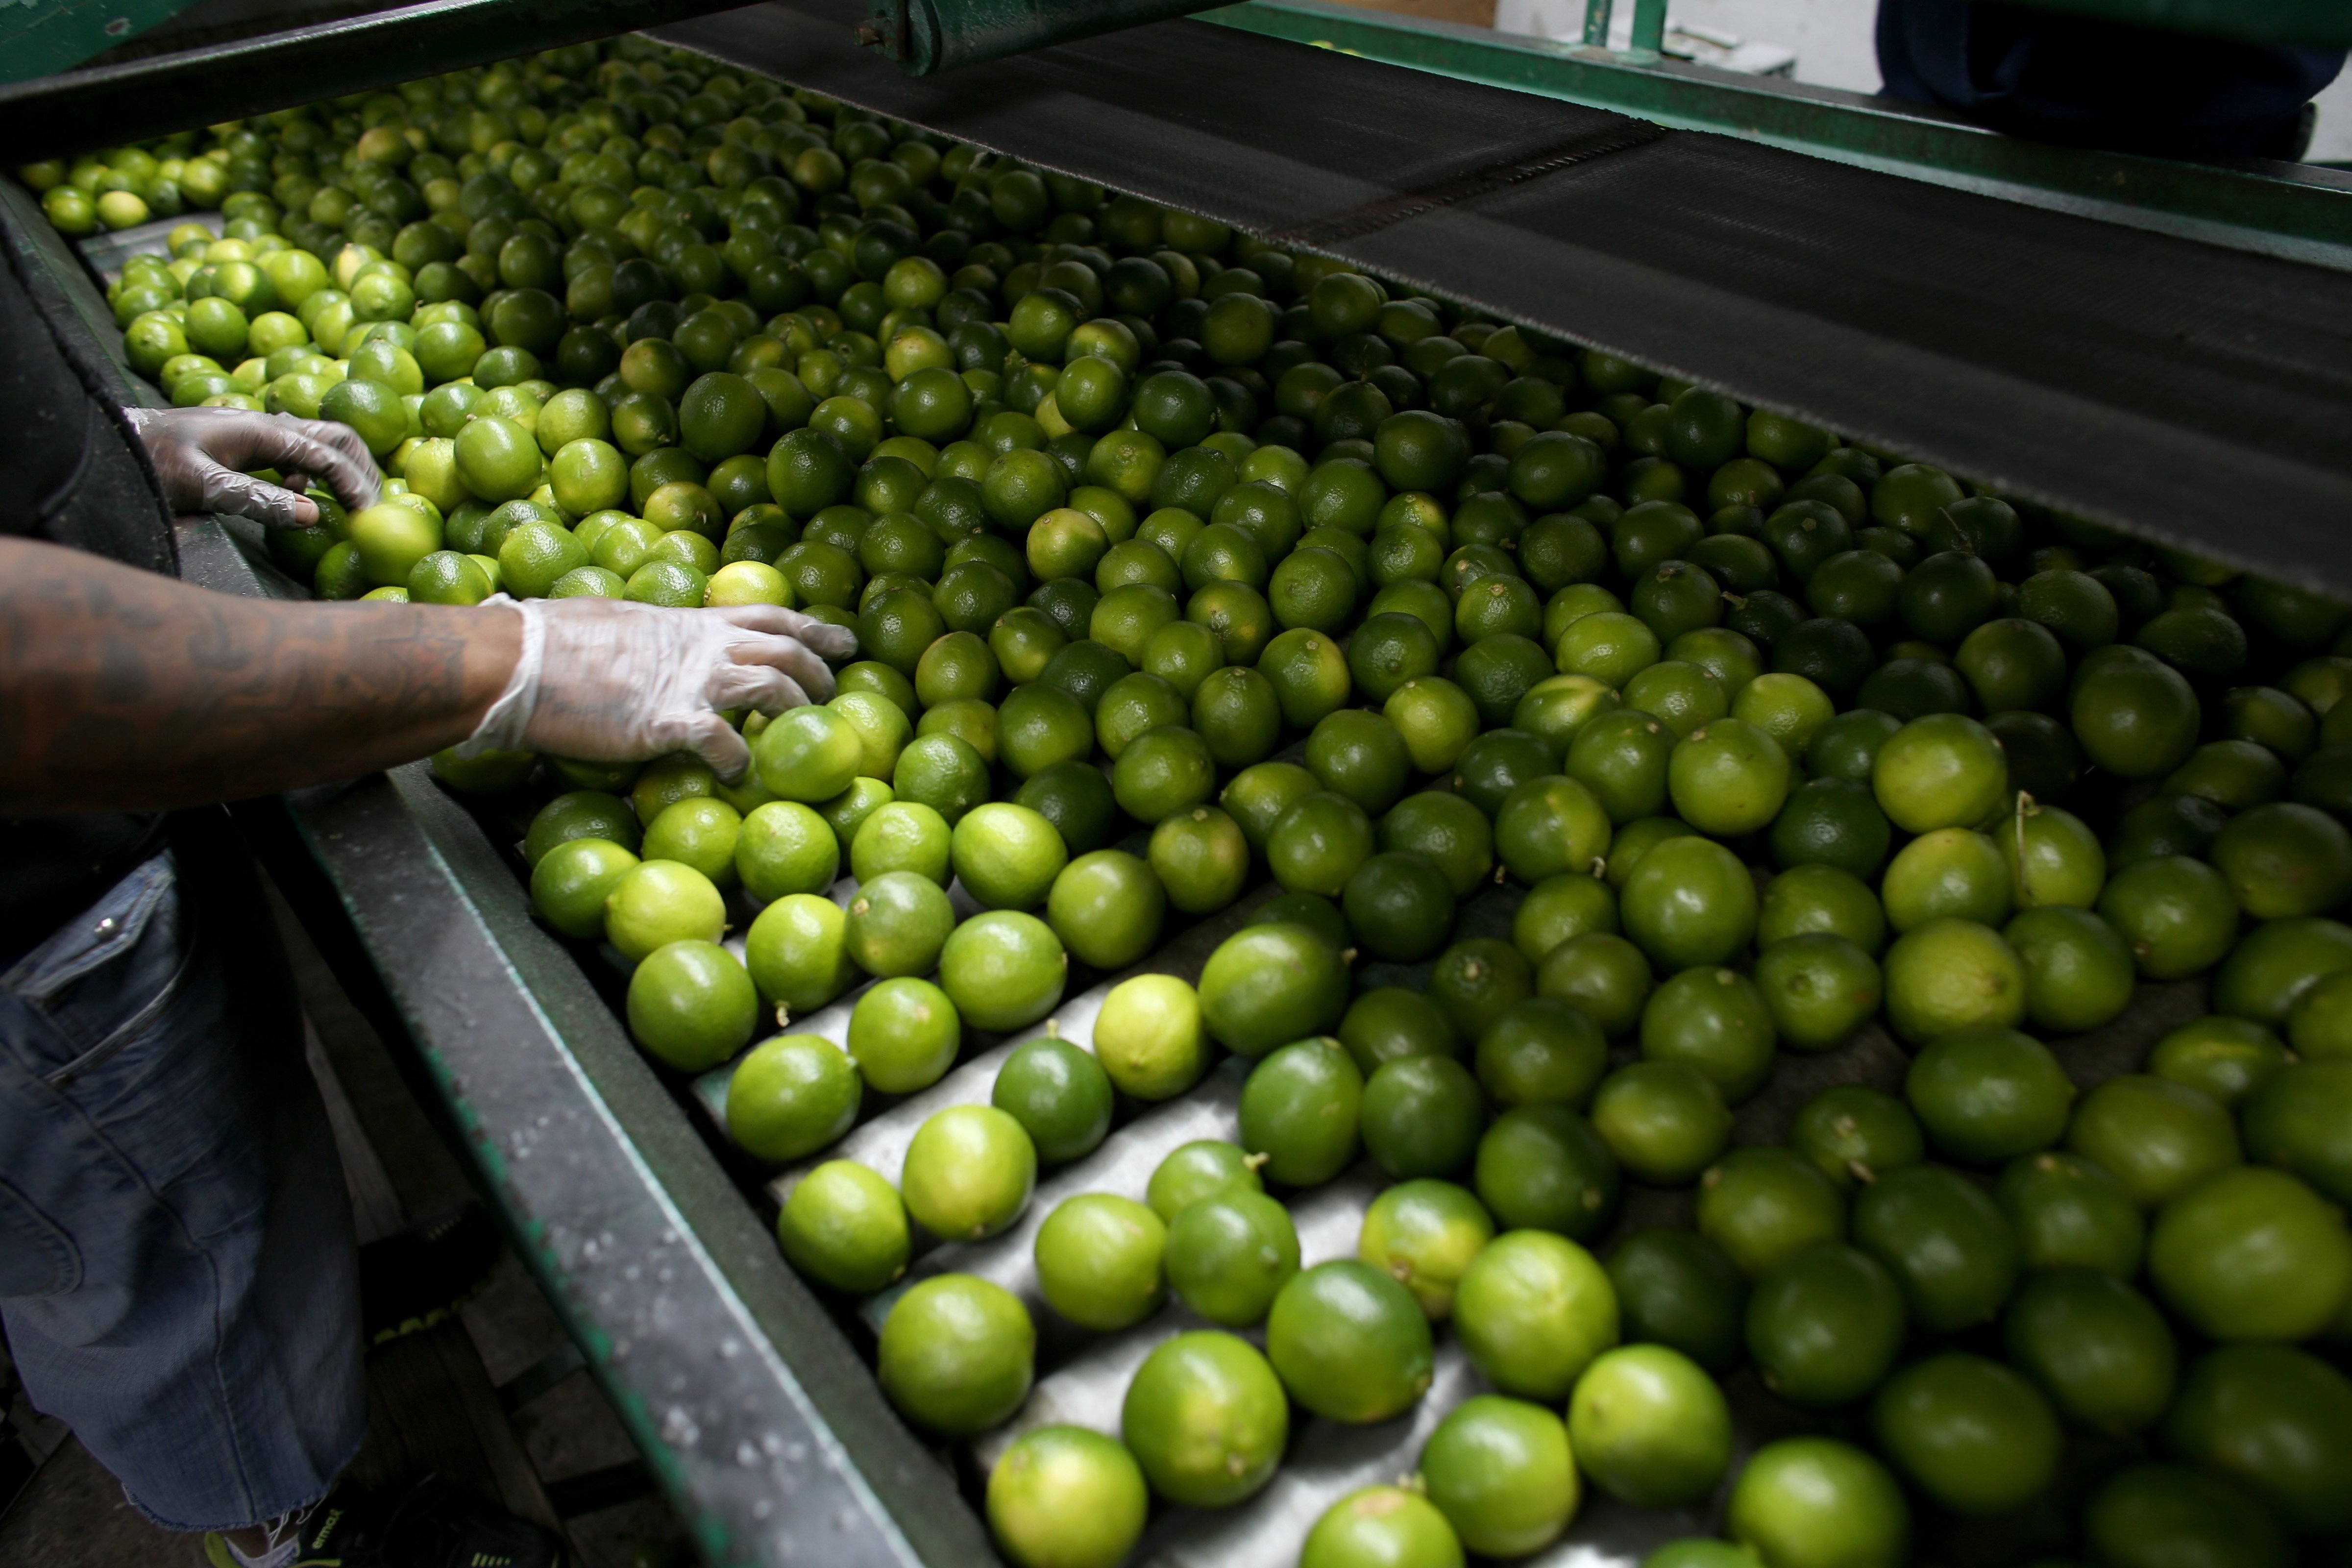 Dairoby Aldana sorts limes that have been imported from Columbia at SA Mex produce on March 26, 2014 in Miami. (Joe Raedle—Getty Images)